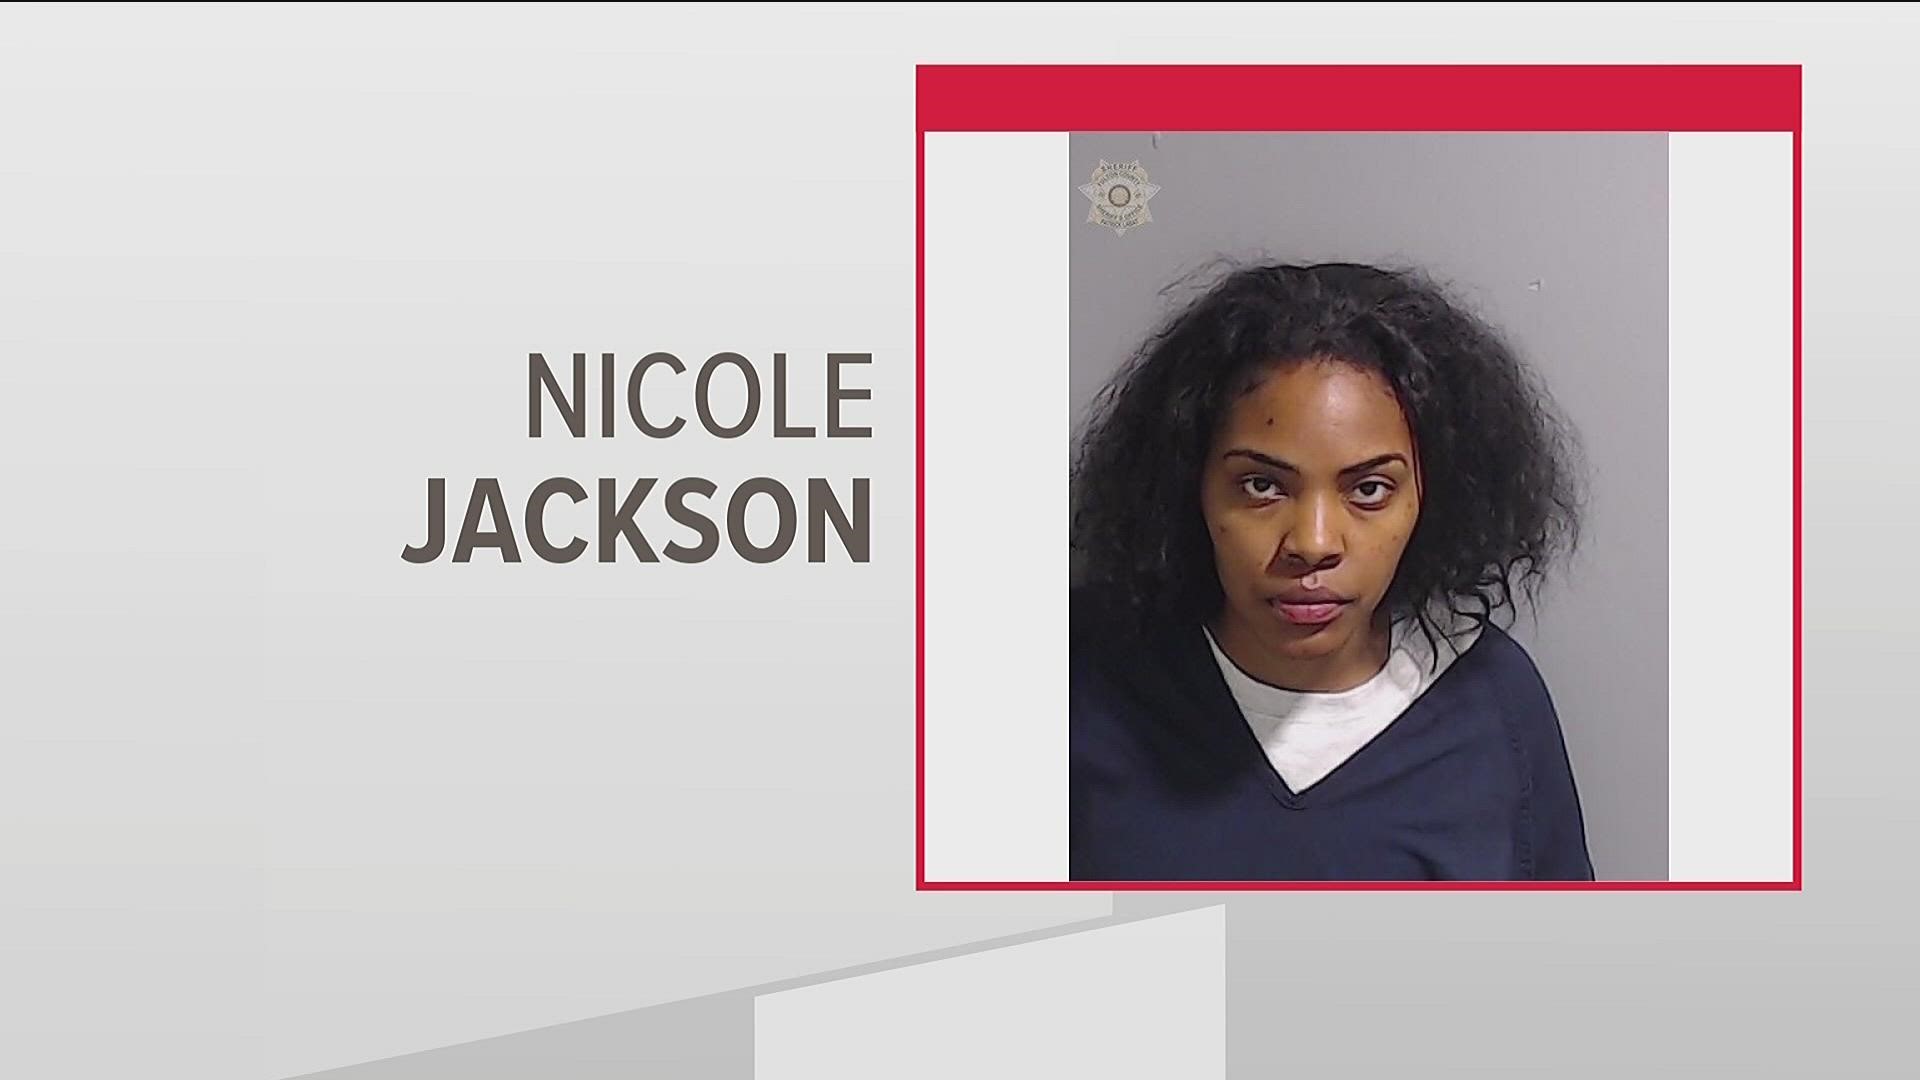 Nicole Jackson is currently behind bars and facing multiple charges, including arson and murder.